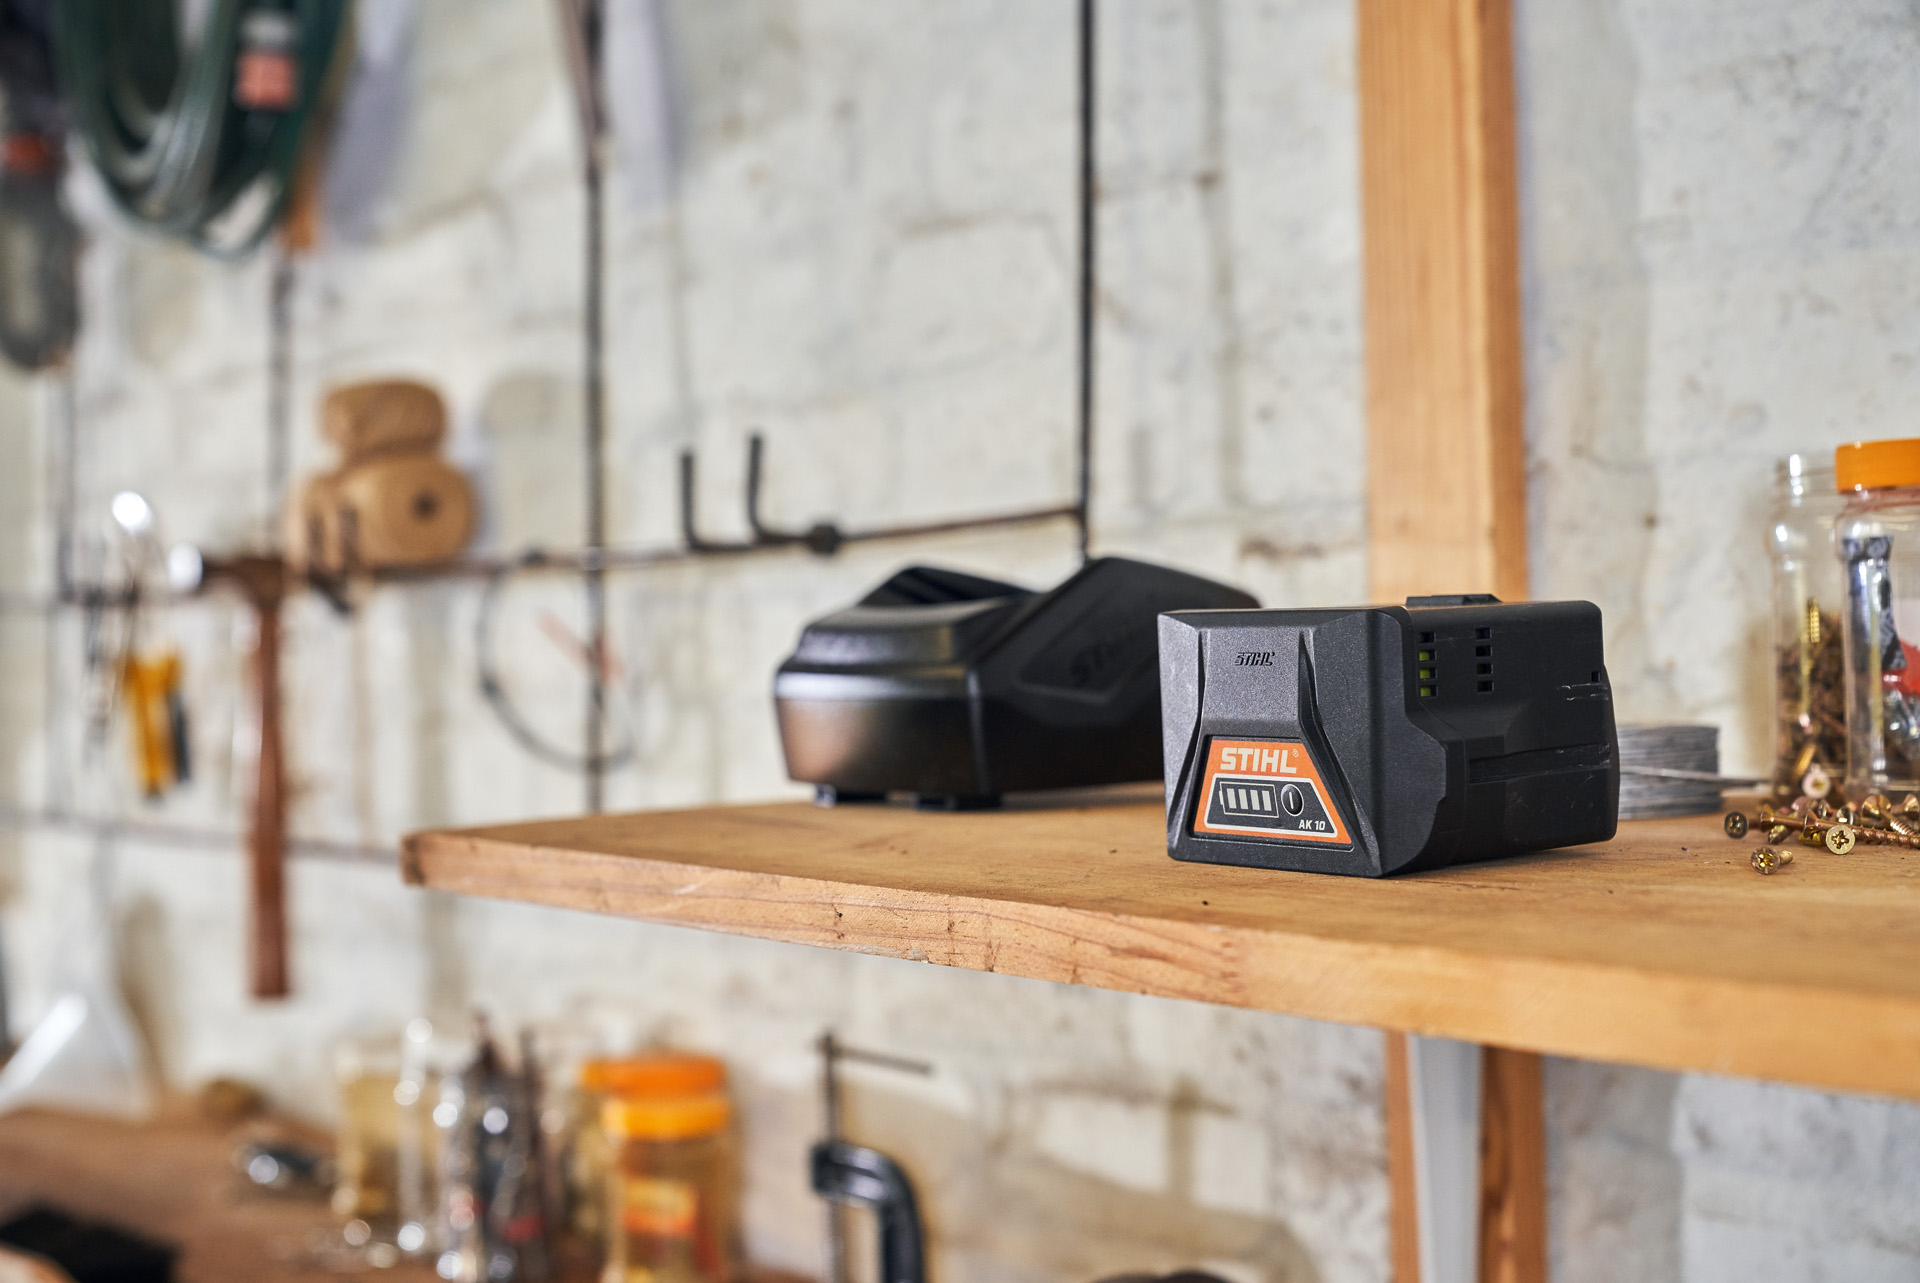 Two batteries with STIHL battery technology on a shelf in a workshop